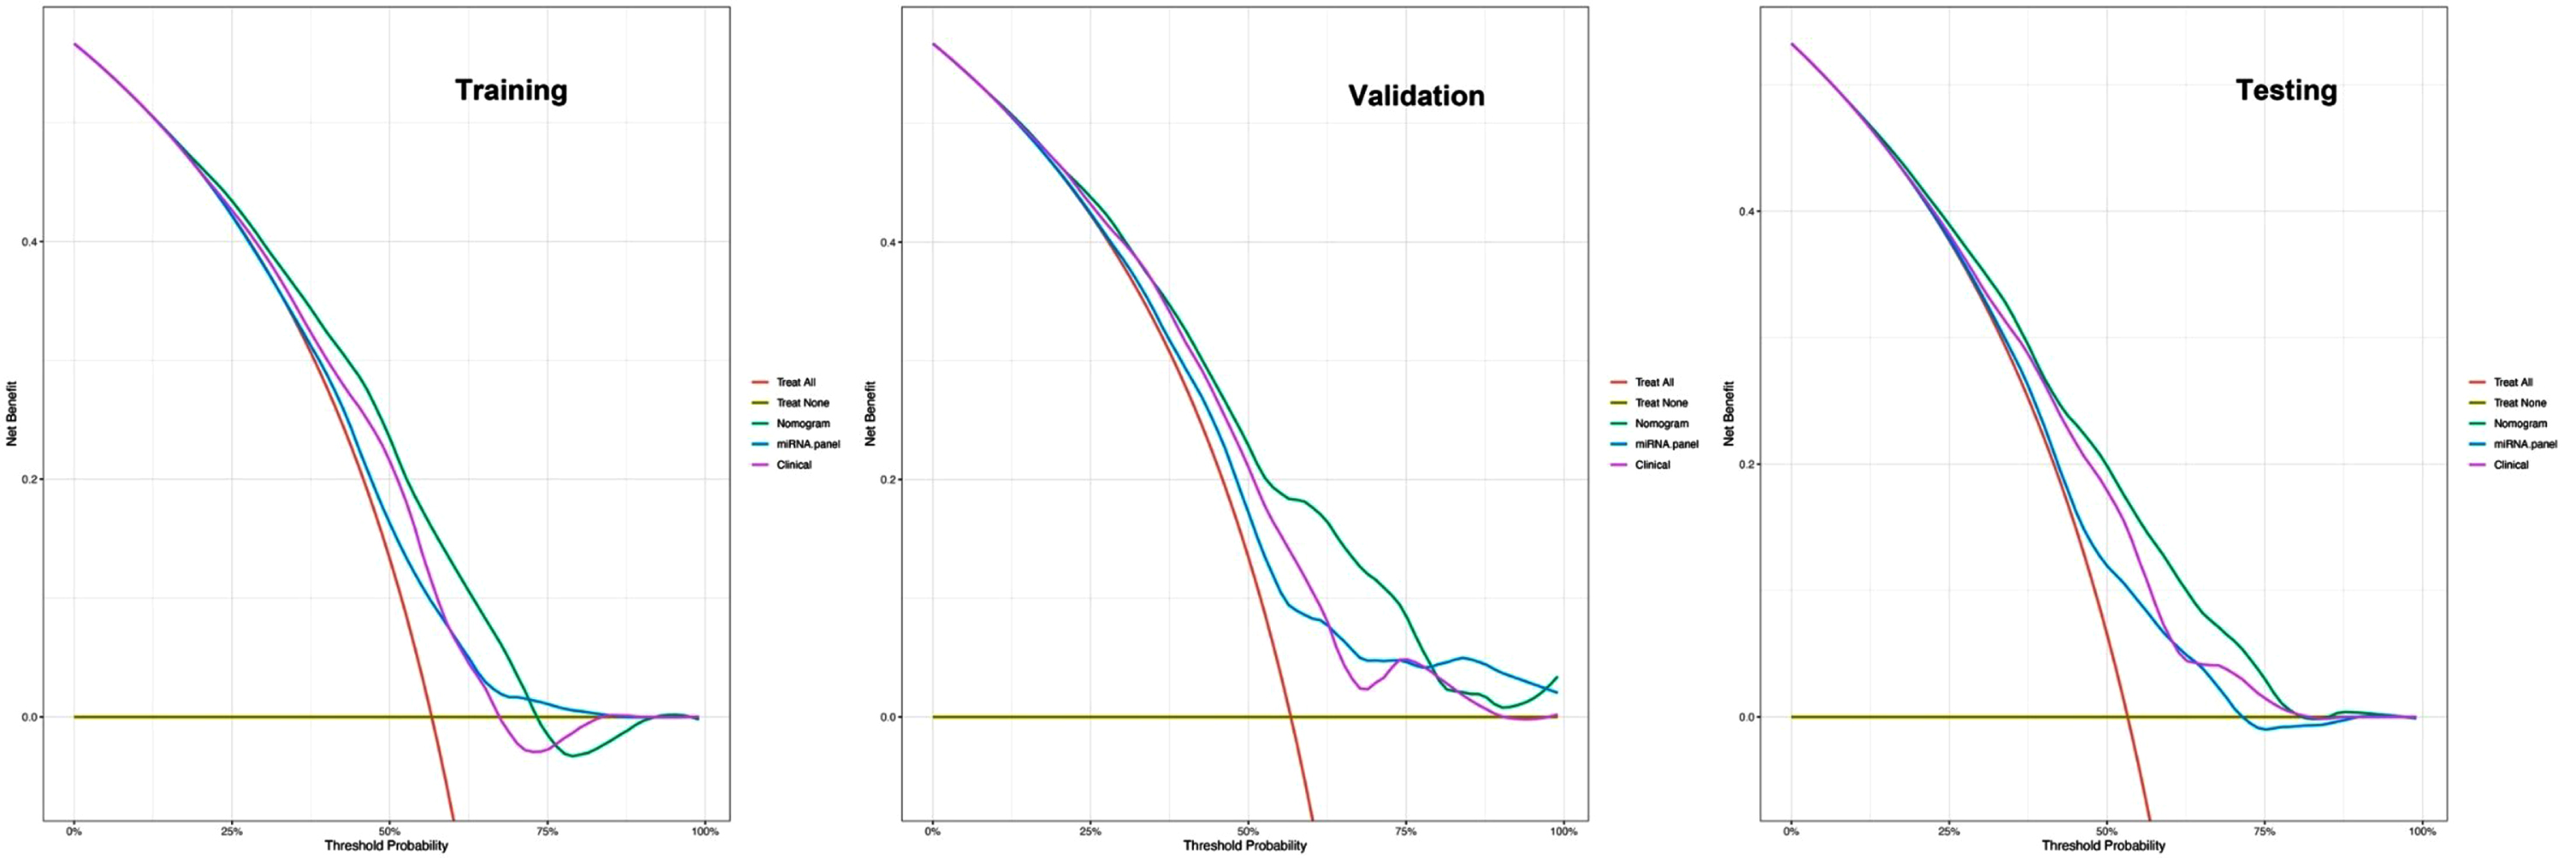 DCA curves for comparisons of the nomogram, clinical and miRNA panel in training, validation, and testing datasets. Shown are the threshold probability (TP) on the x-axis and the net benefit on the y-axis. Assuming the TP is predetermined, the models which are close to the top regions can obtain the maximum net benefit compared with treating all or treating none or other interventions. The clinical model consists of age, gender, and education level, while the miRNA panel includes 10 miRNAs.